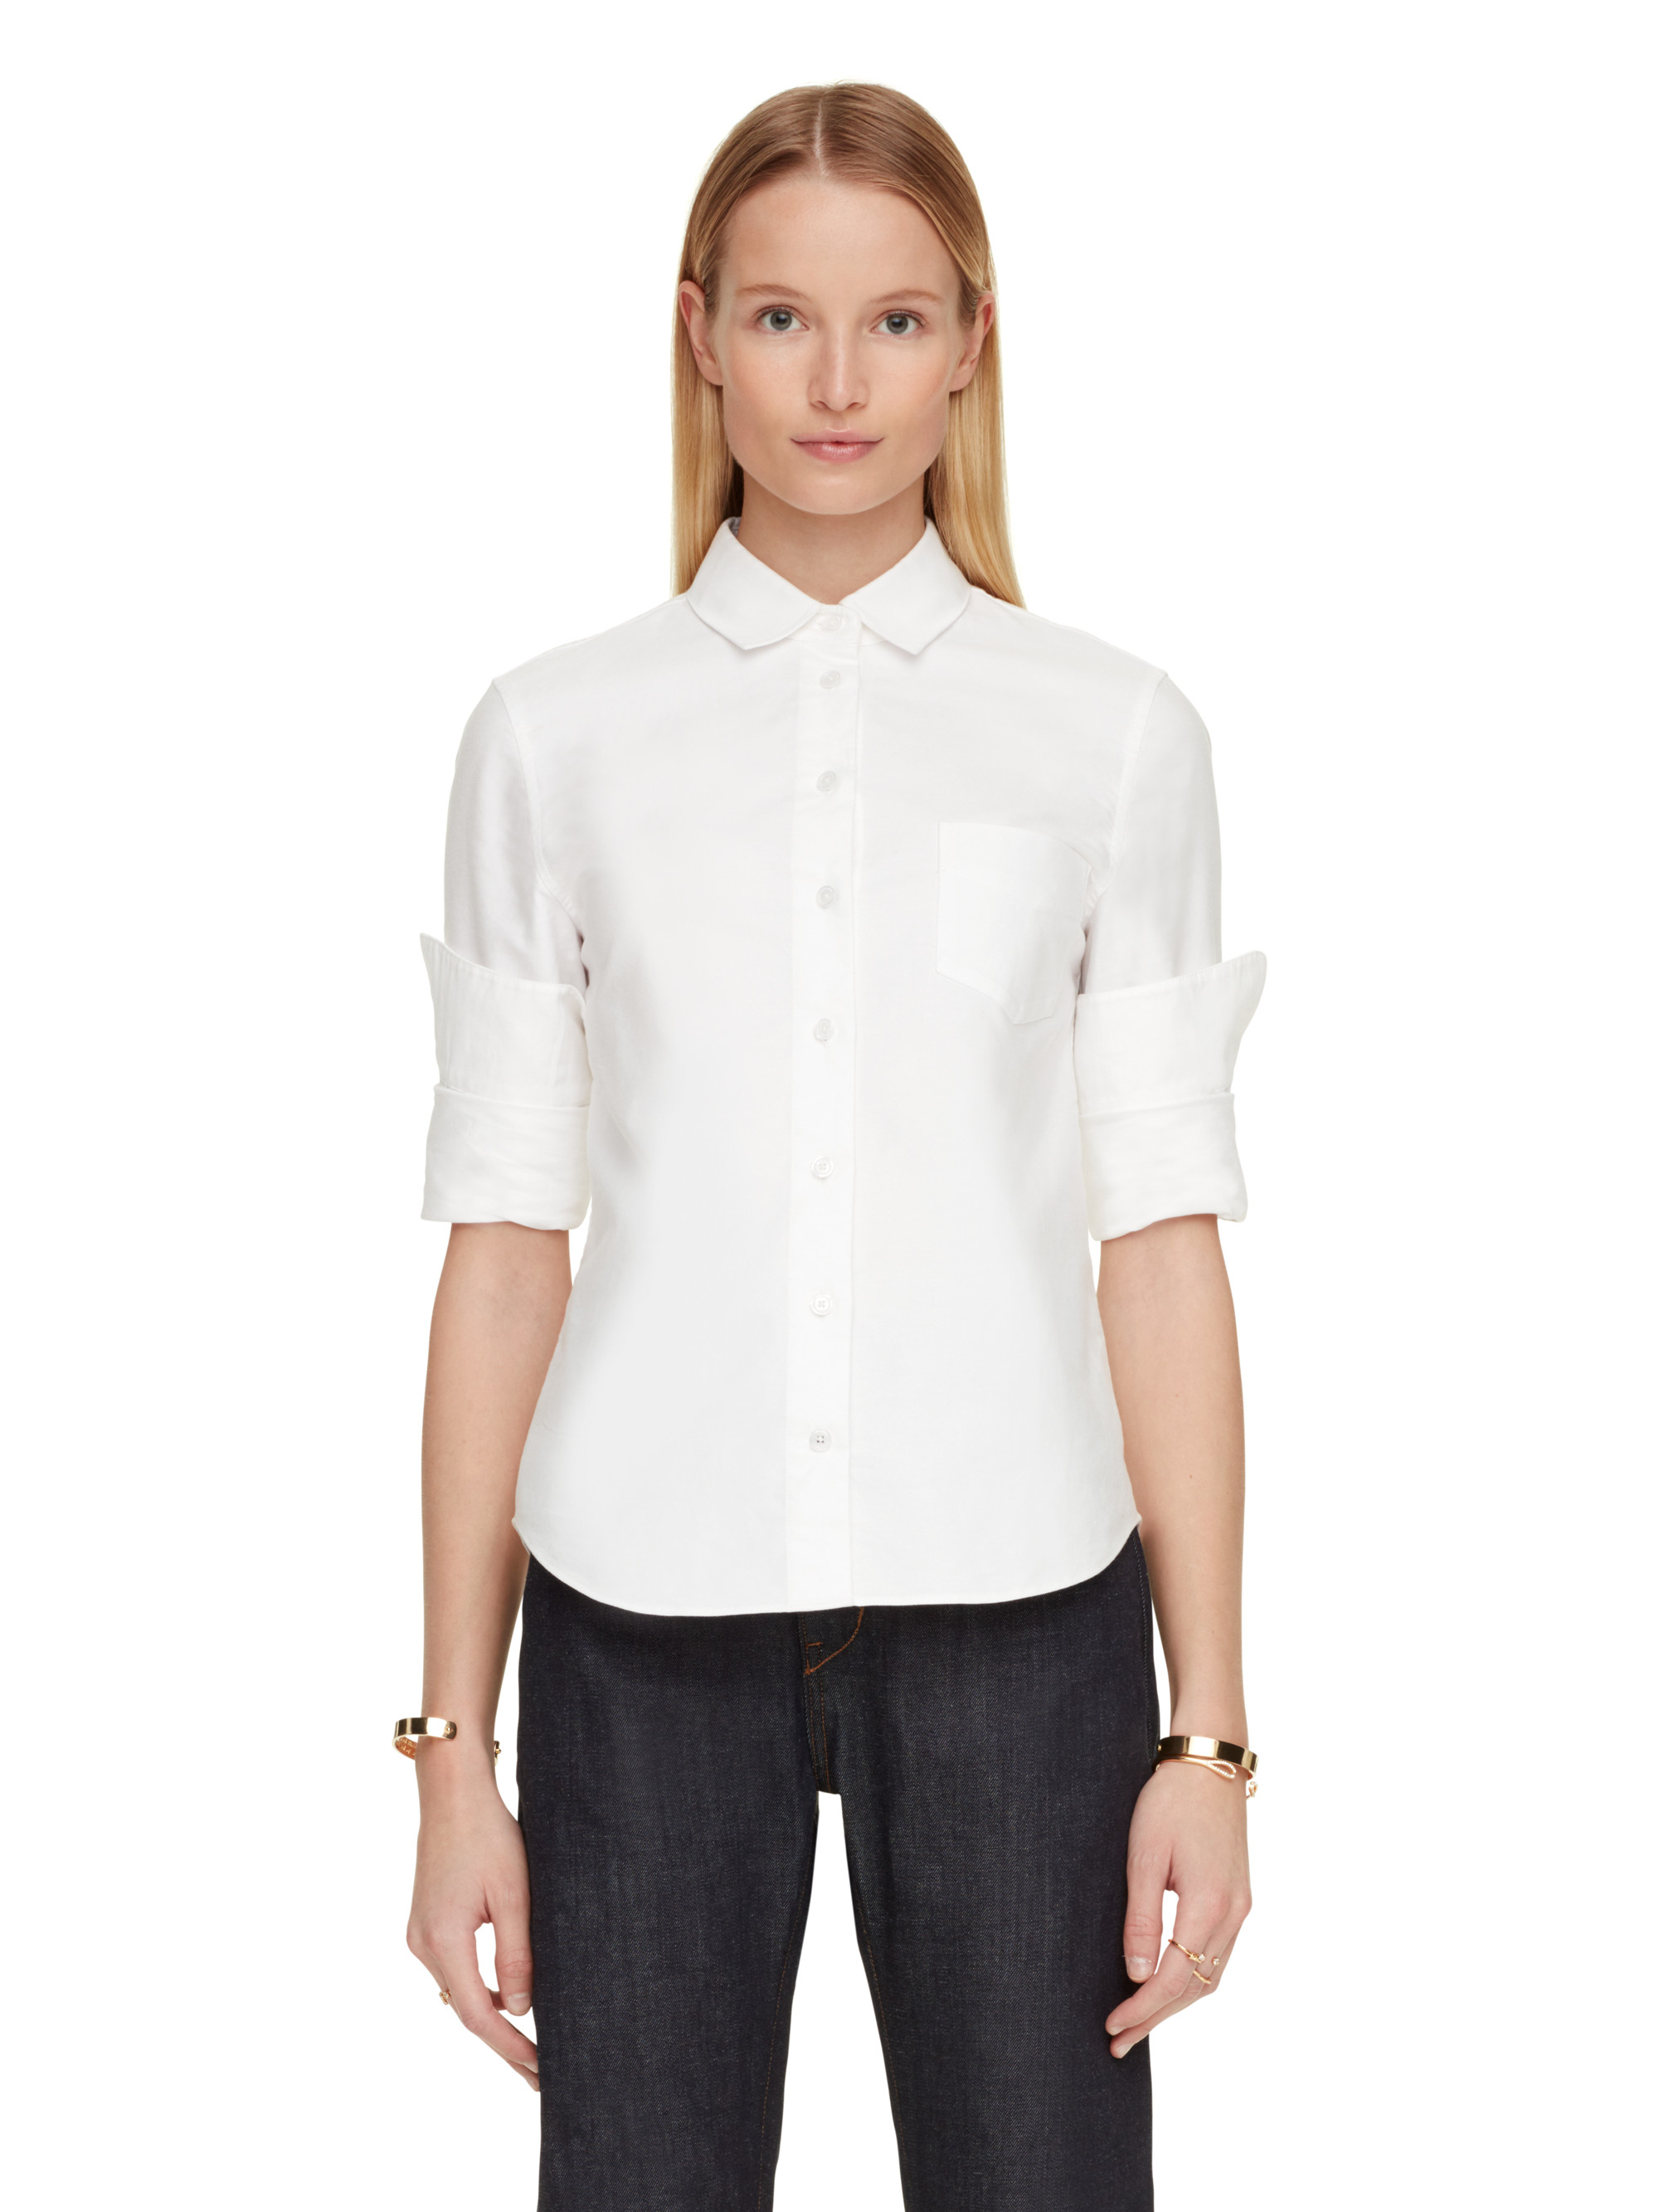 Kate spade Smart Oxford Shirt in White | Lyst